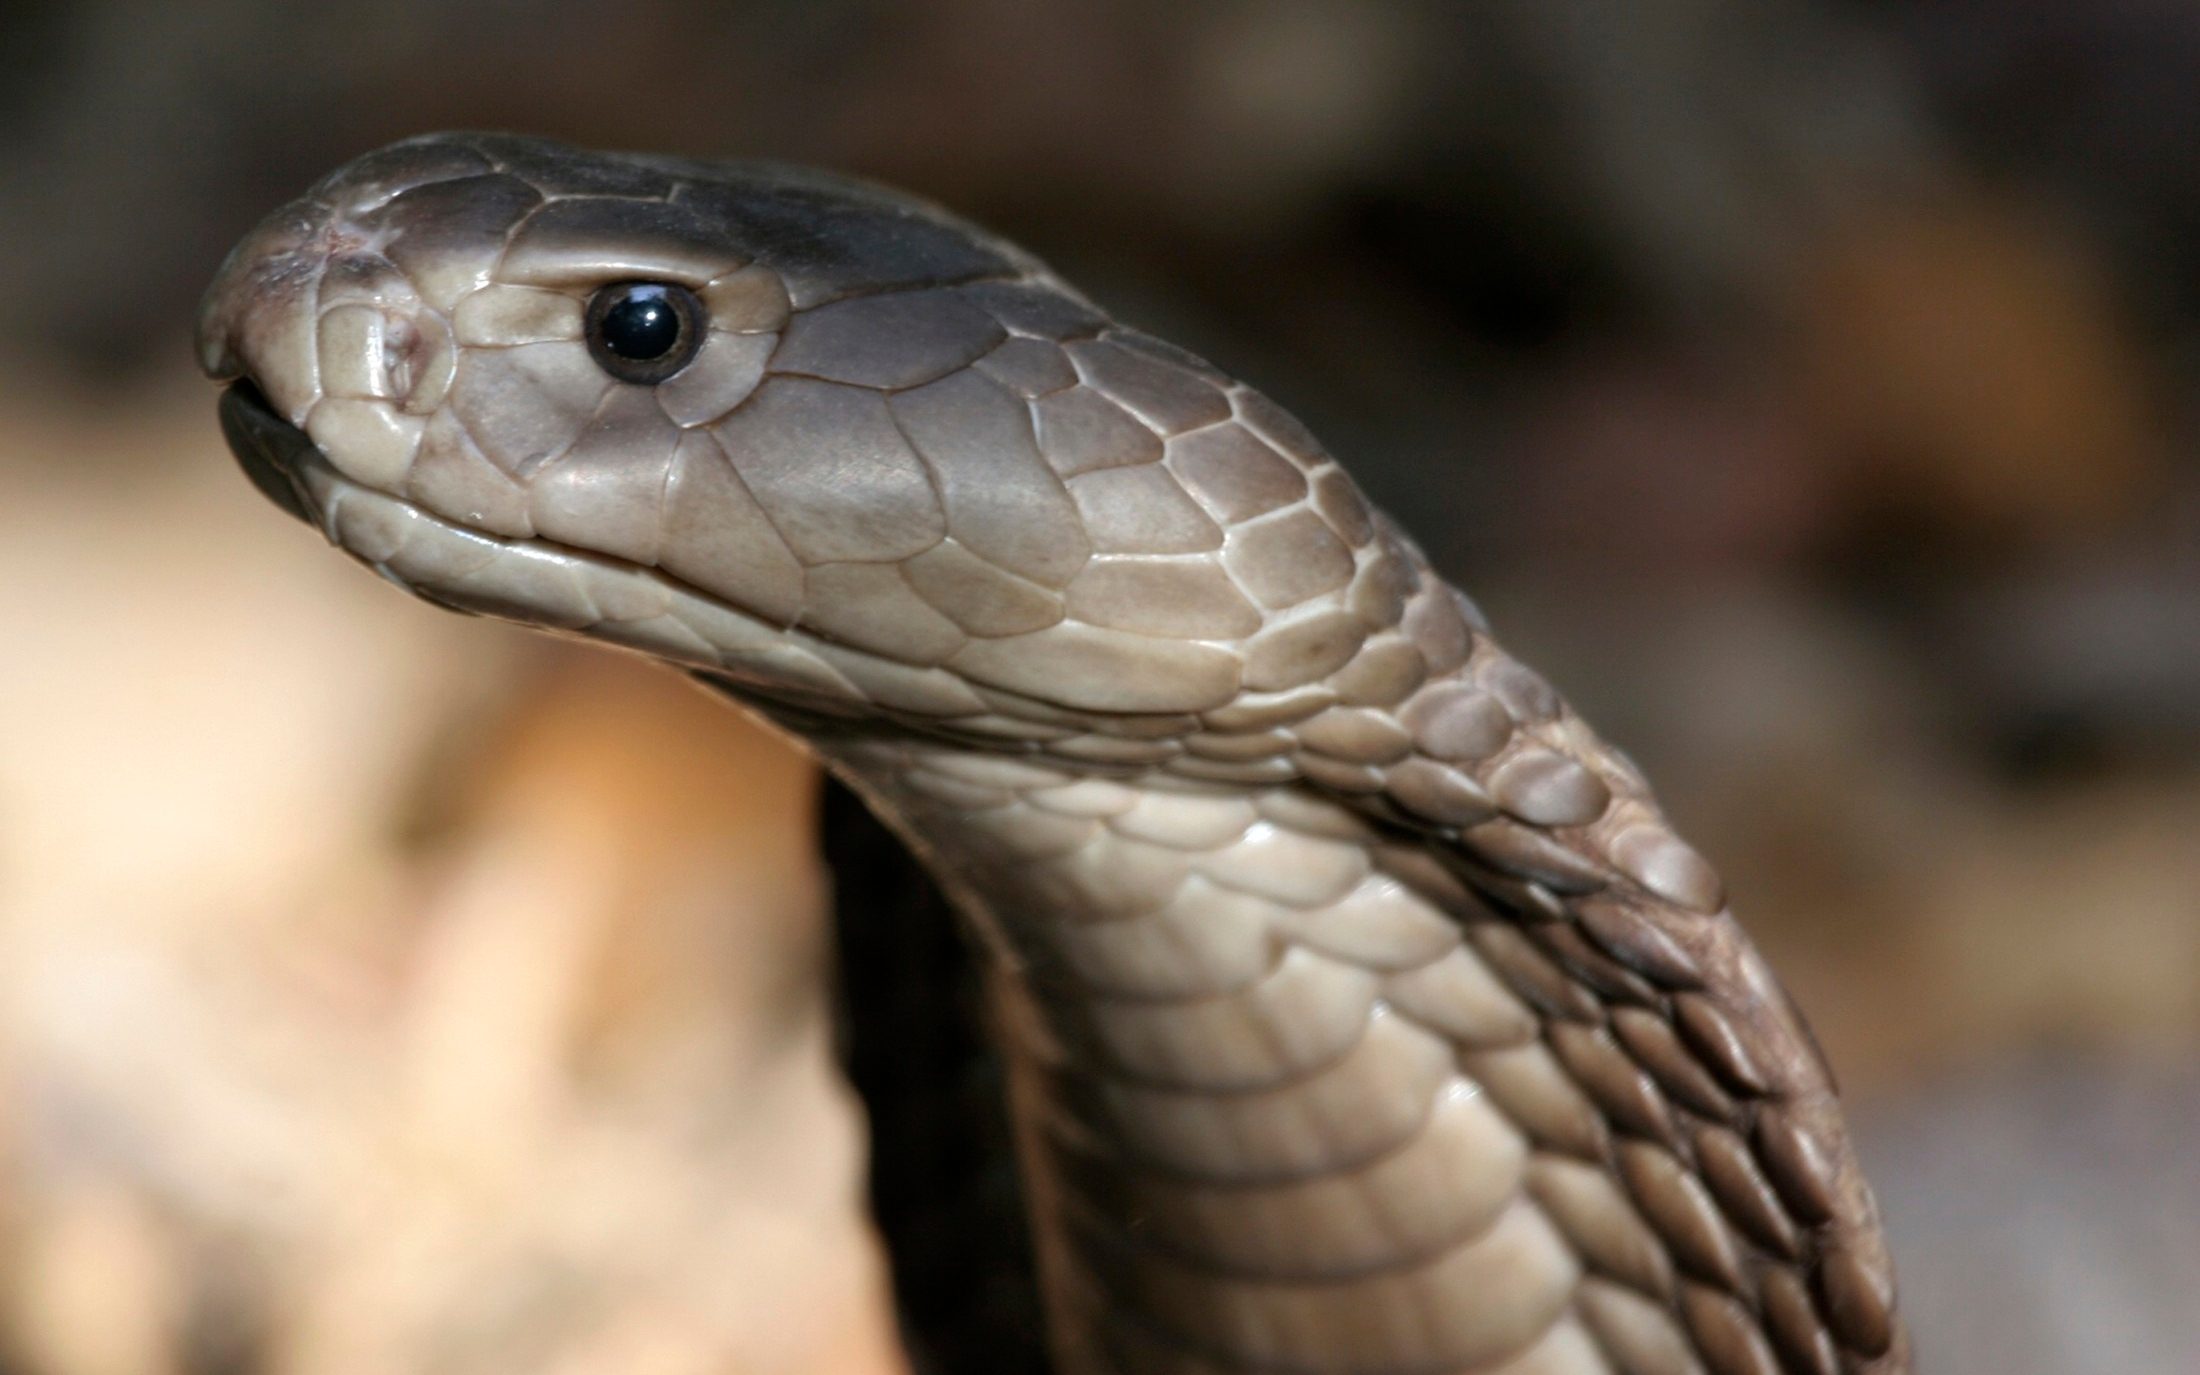 inflammation drug could be repurposed to treat toxic snake bites